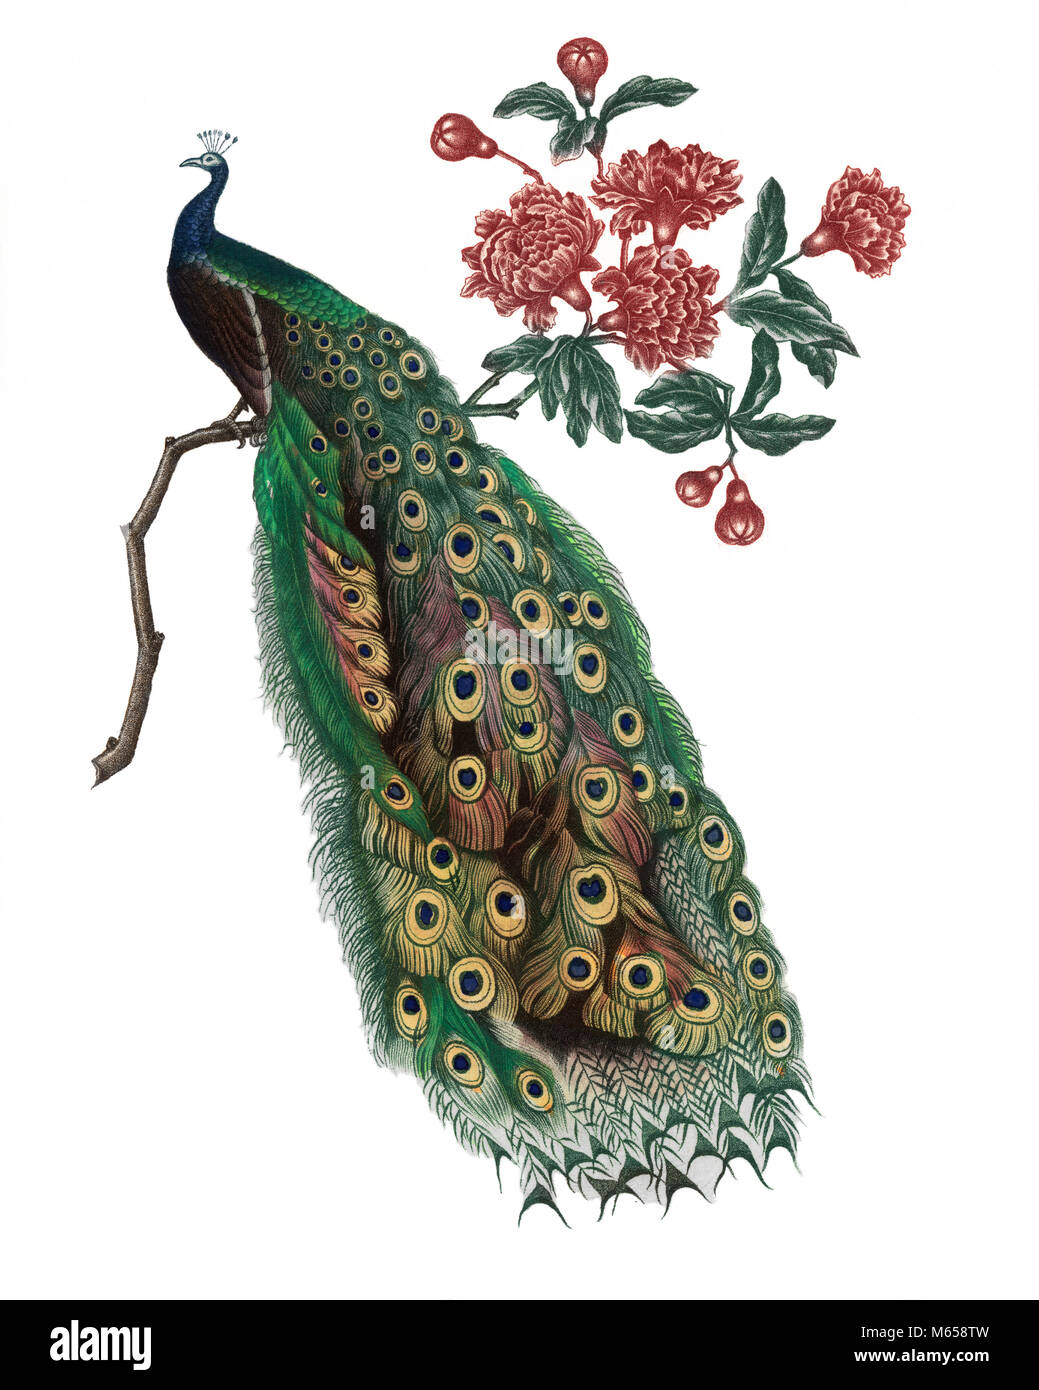 DRAWING OF MALE PEACOCK (Pavo cristatus) SITTING ON FLOWERED ...